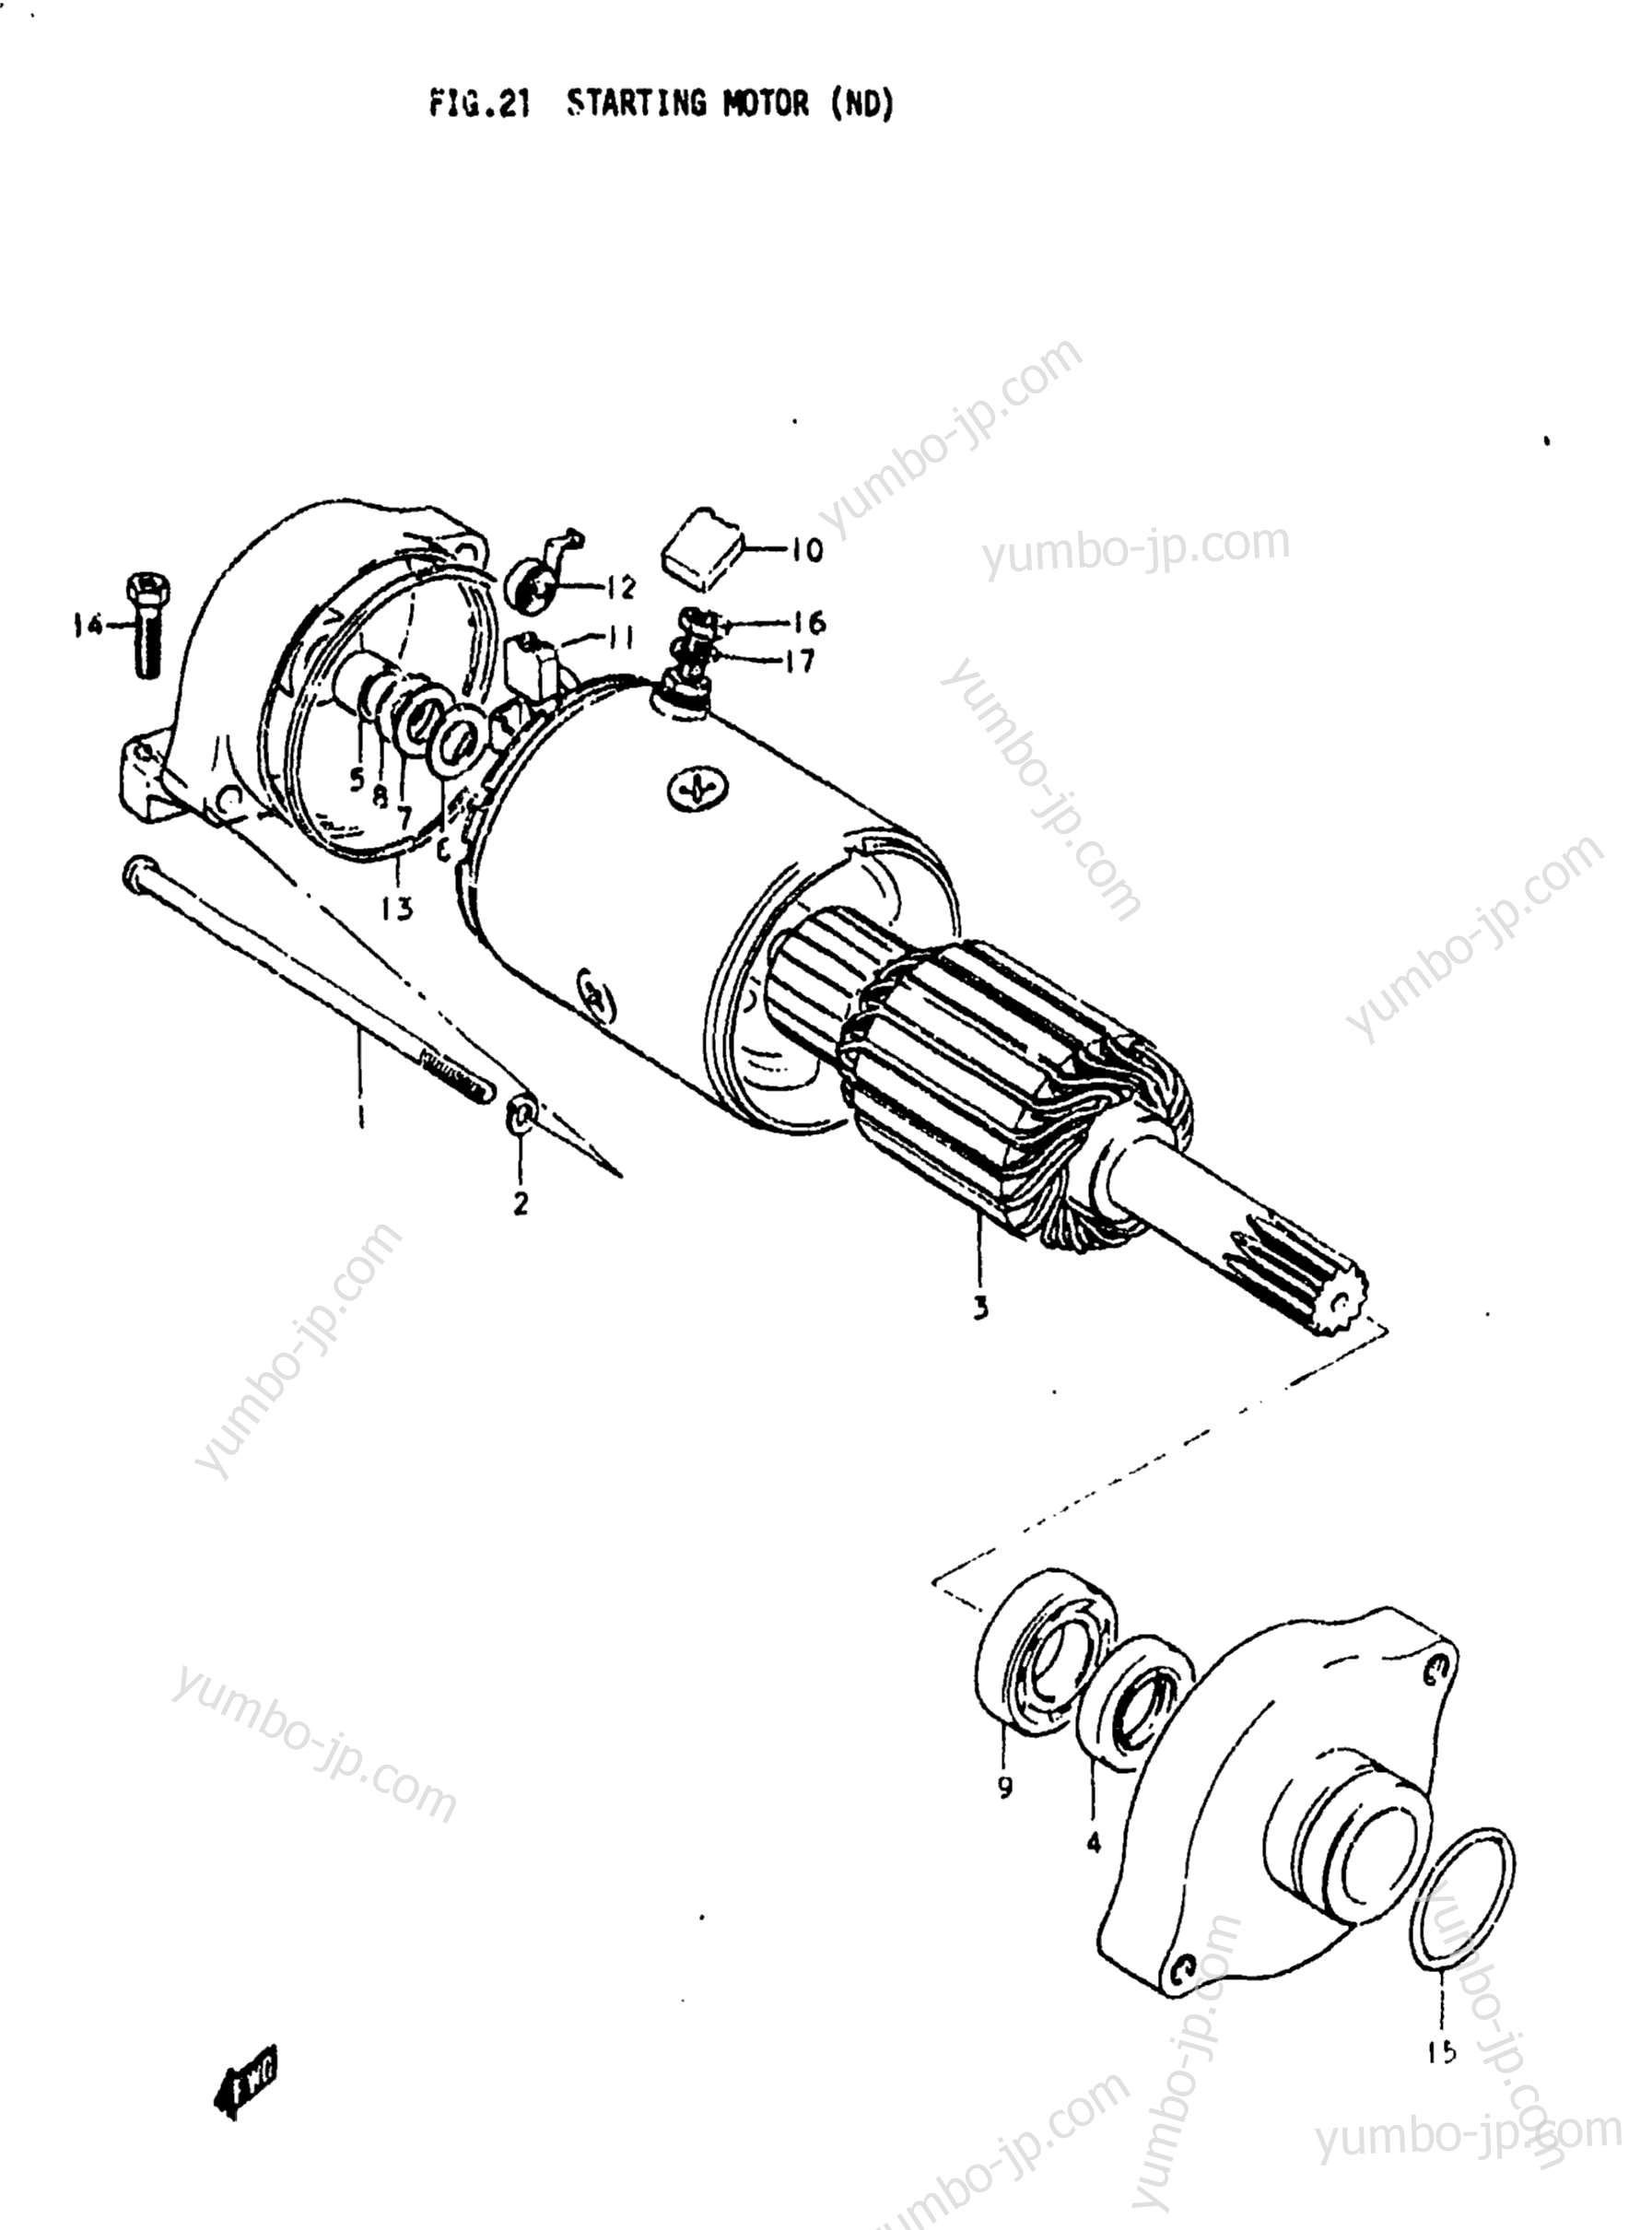 STARTING MOTOR (ND) for motorcycles SUZUKI GS750L 1979 year